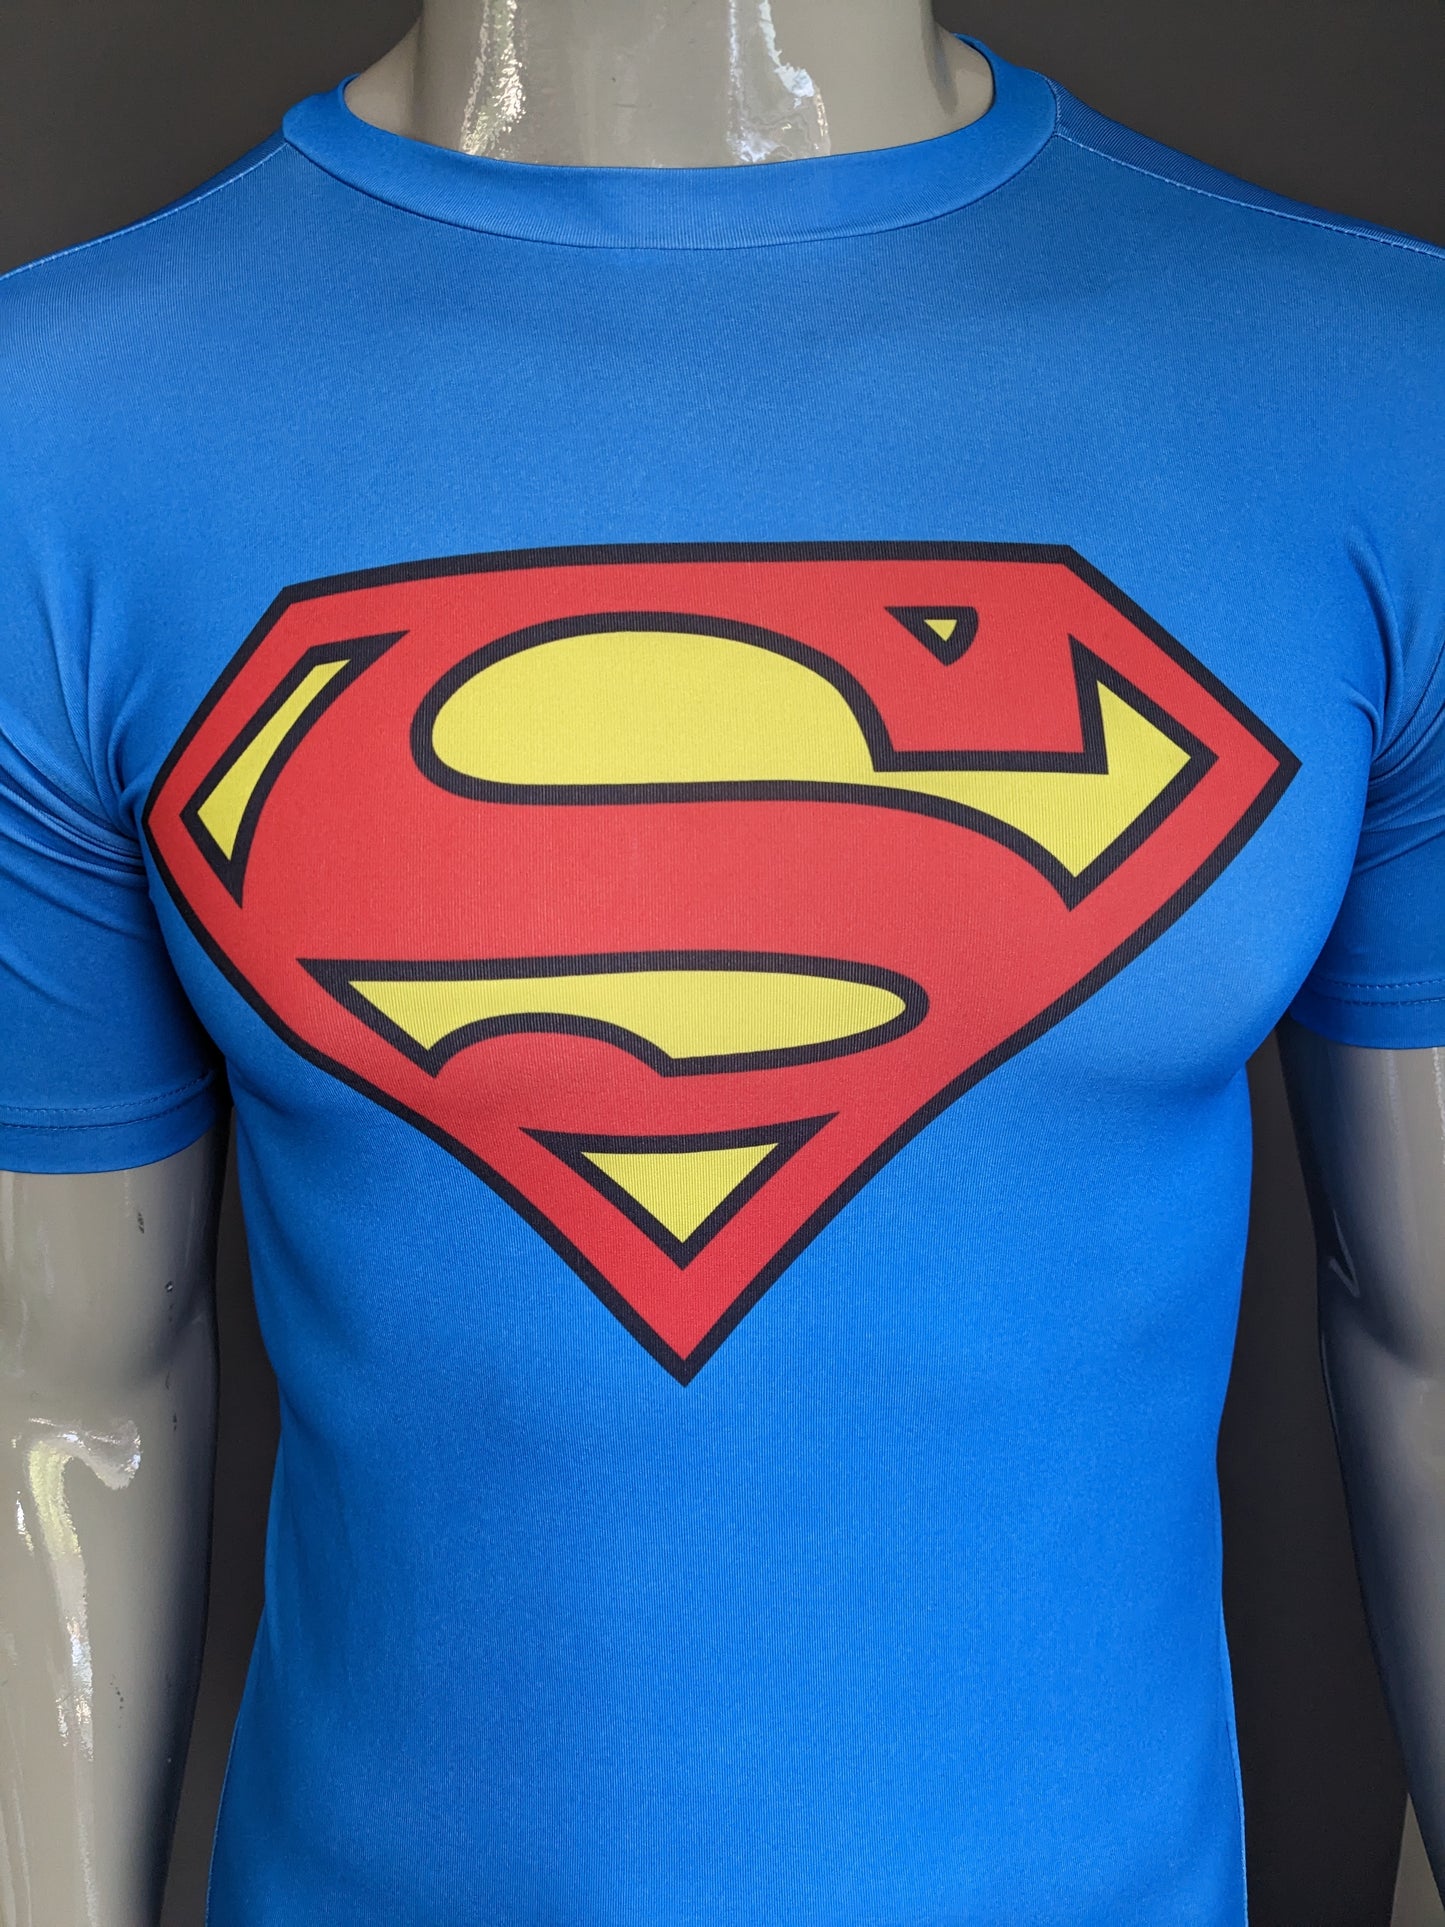 Superman shirt. Blue red yellow colored. Size S. Stretch.